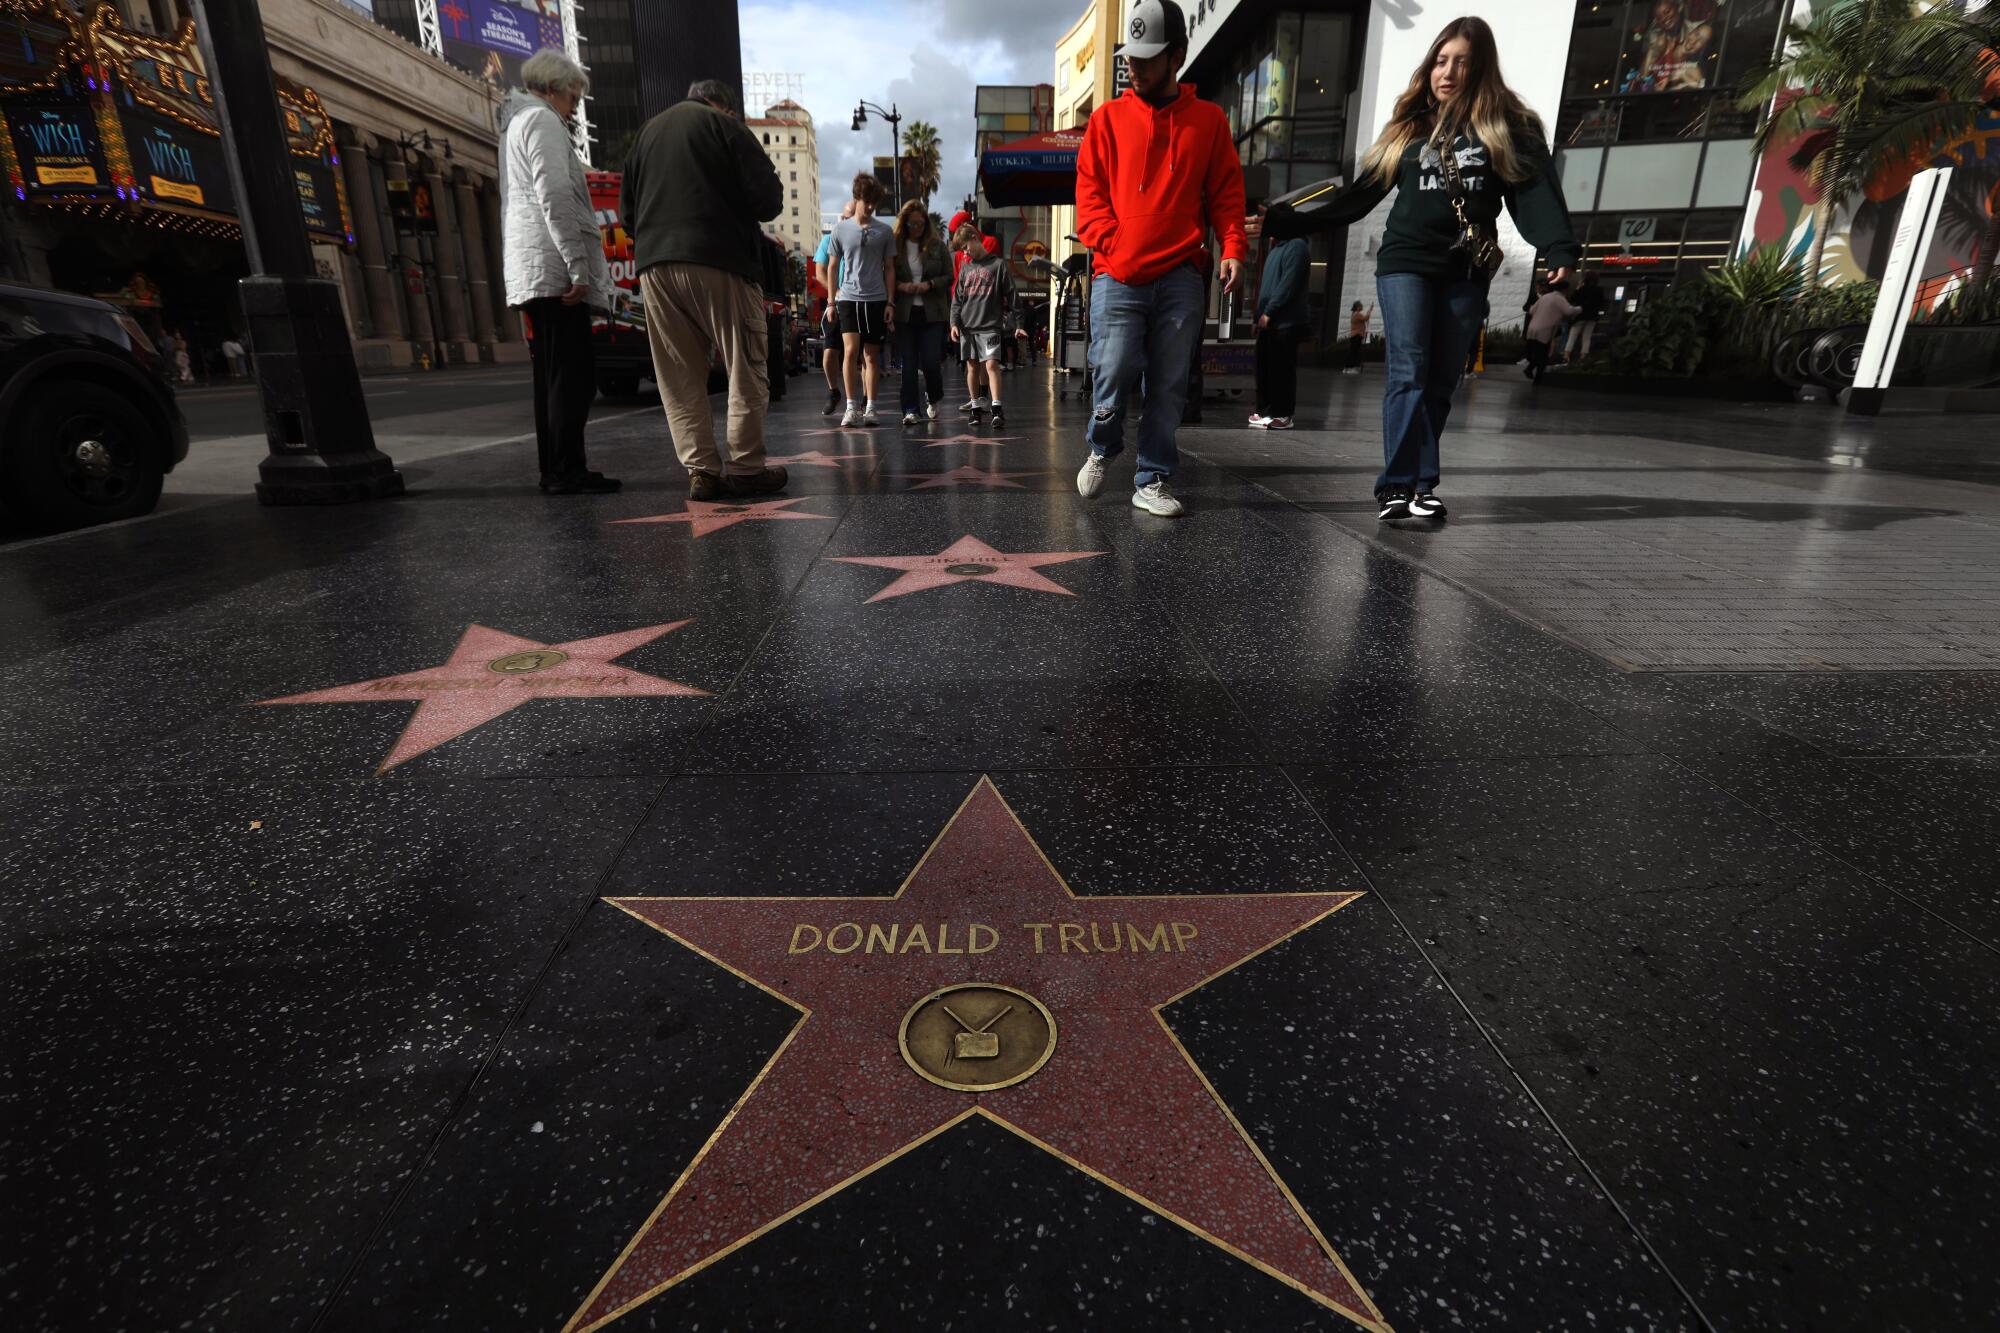 Visitors walk toward Donald Trump's star on the Hollywood Walk of Fame on Dec. 22.